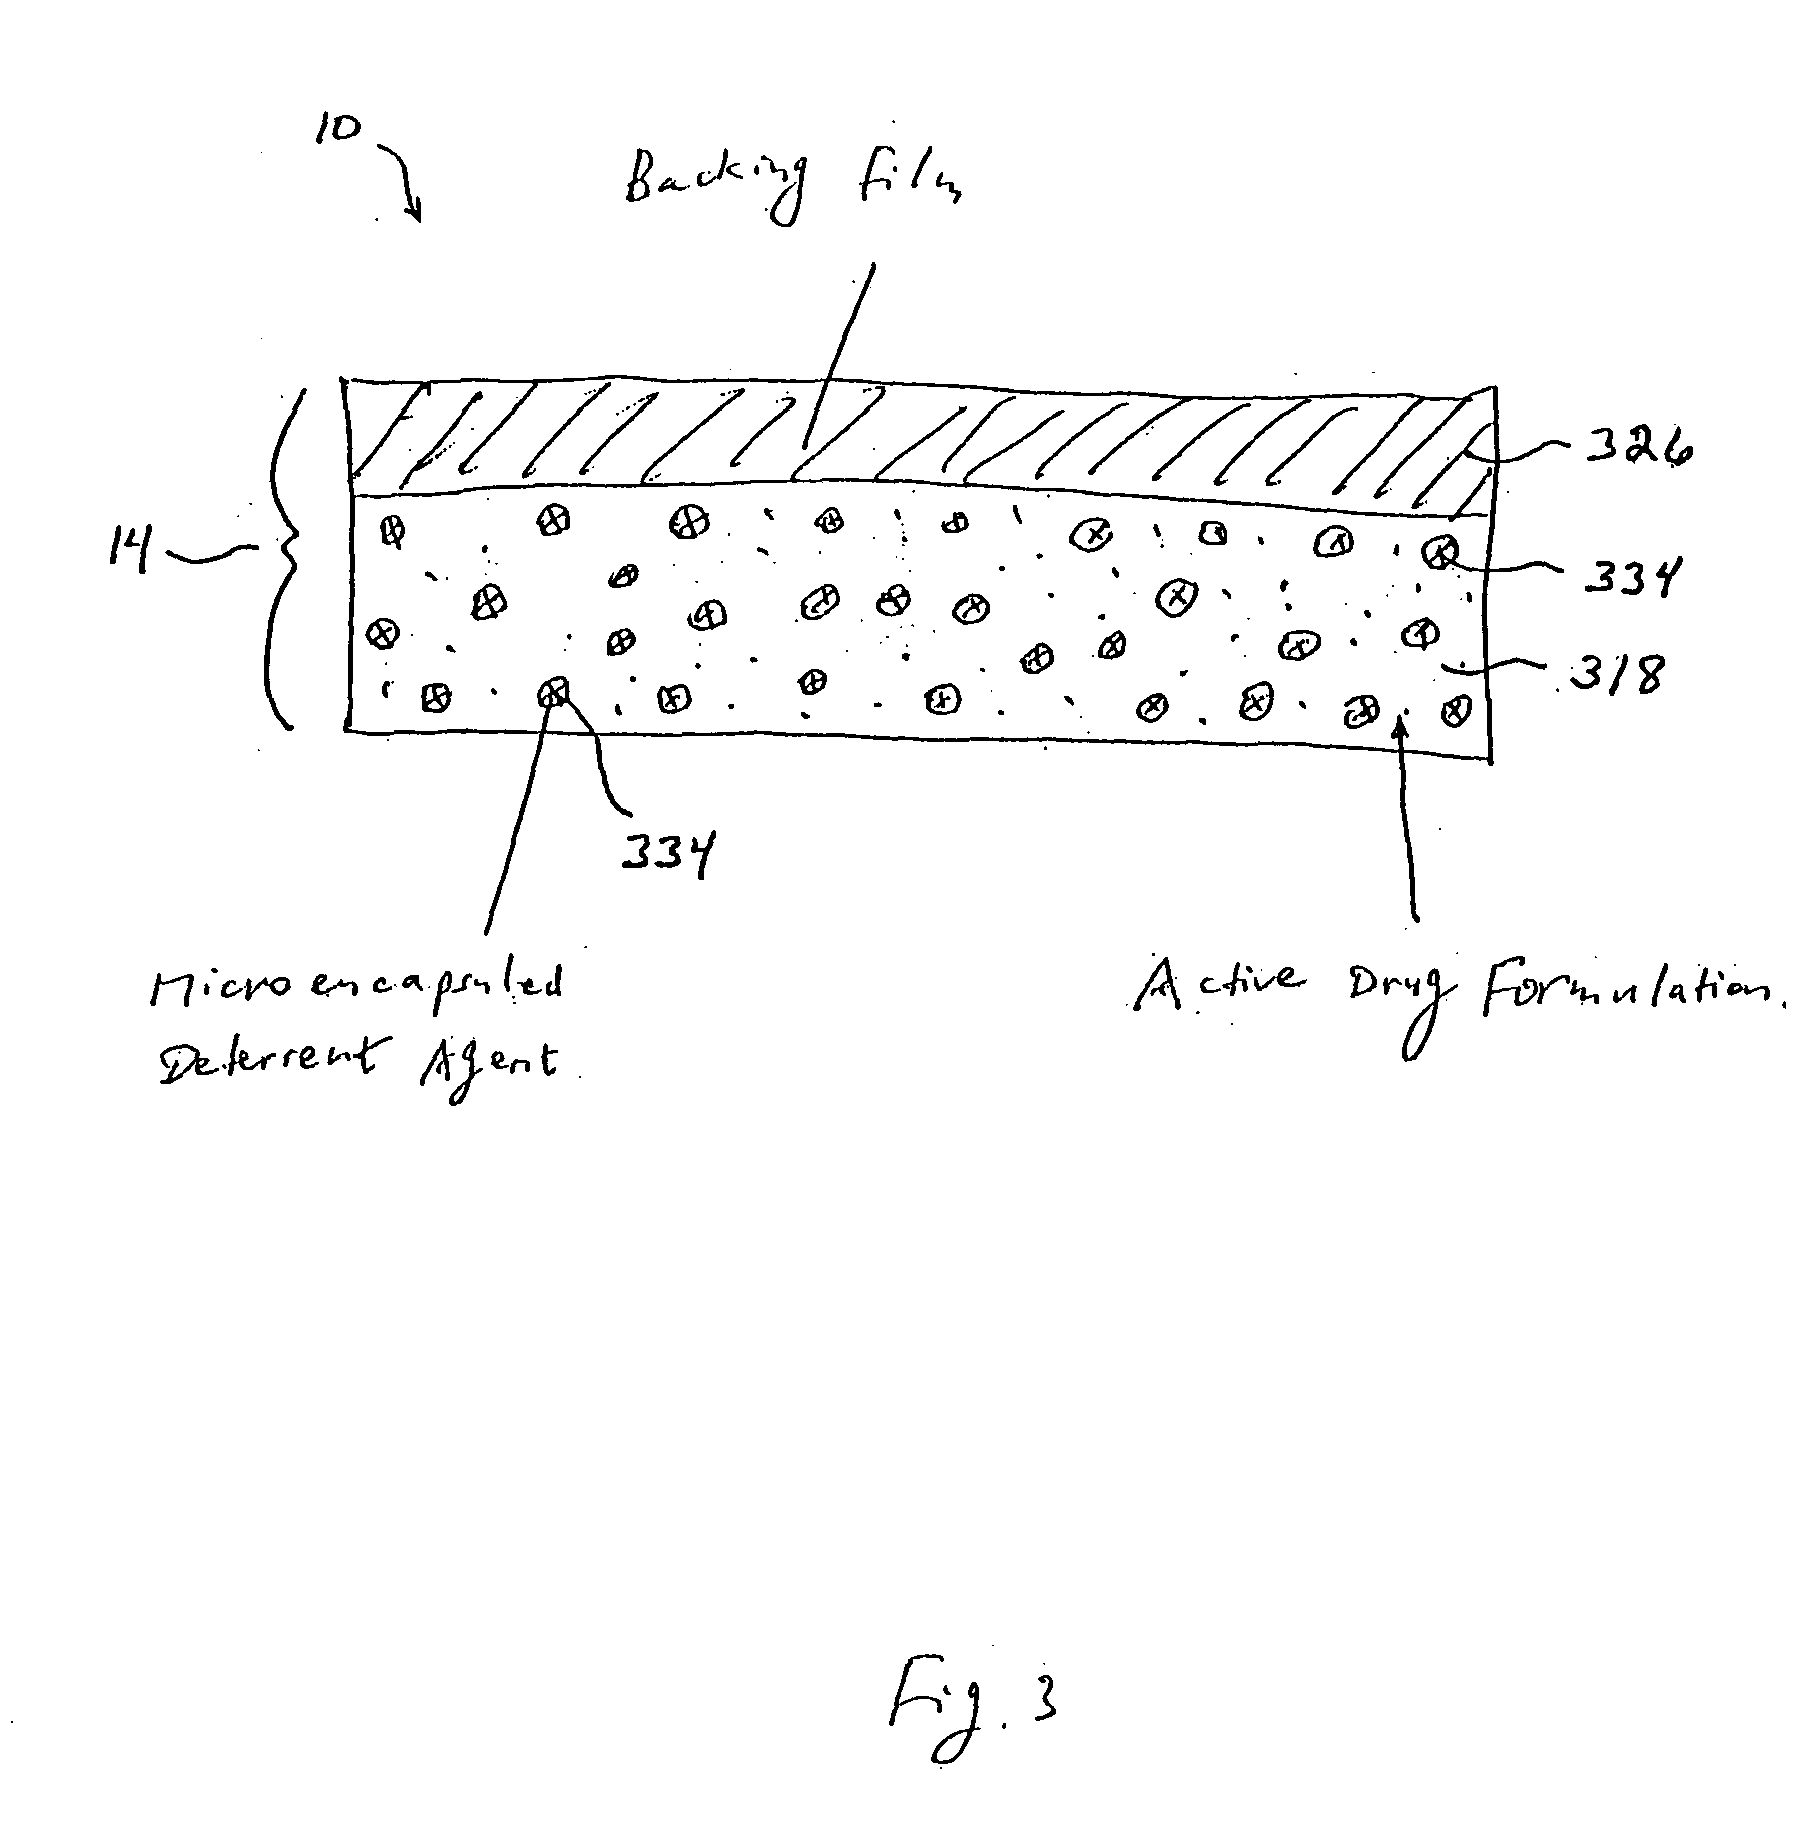 Methods and apparatus for transdermal delivery of abusable drugs with a deterrent agent